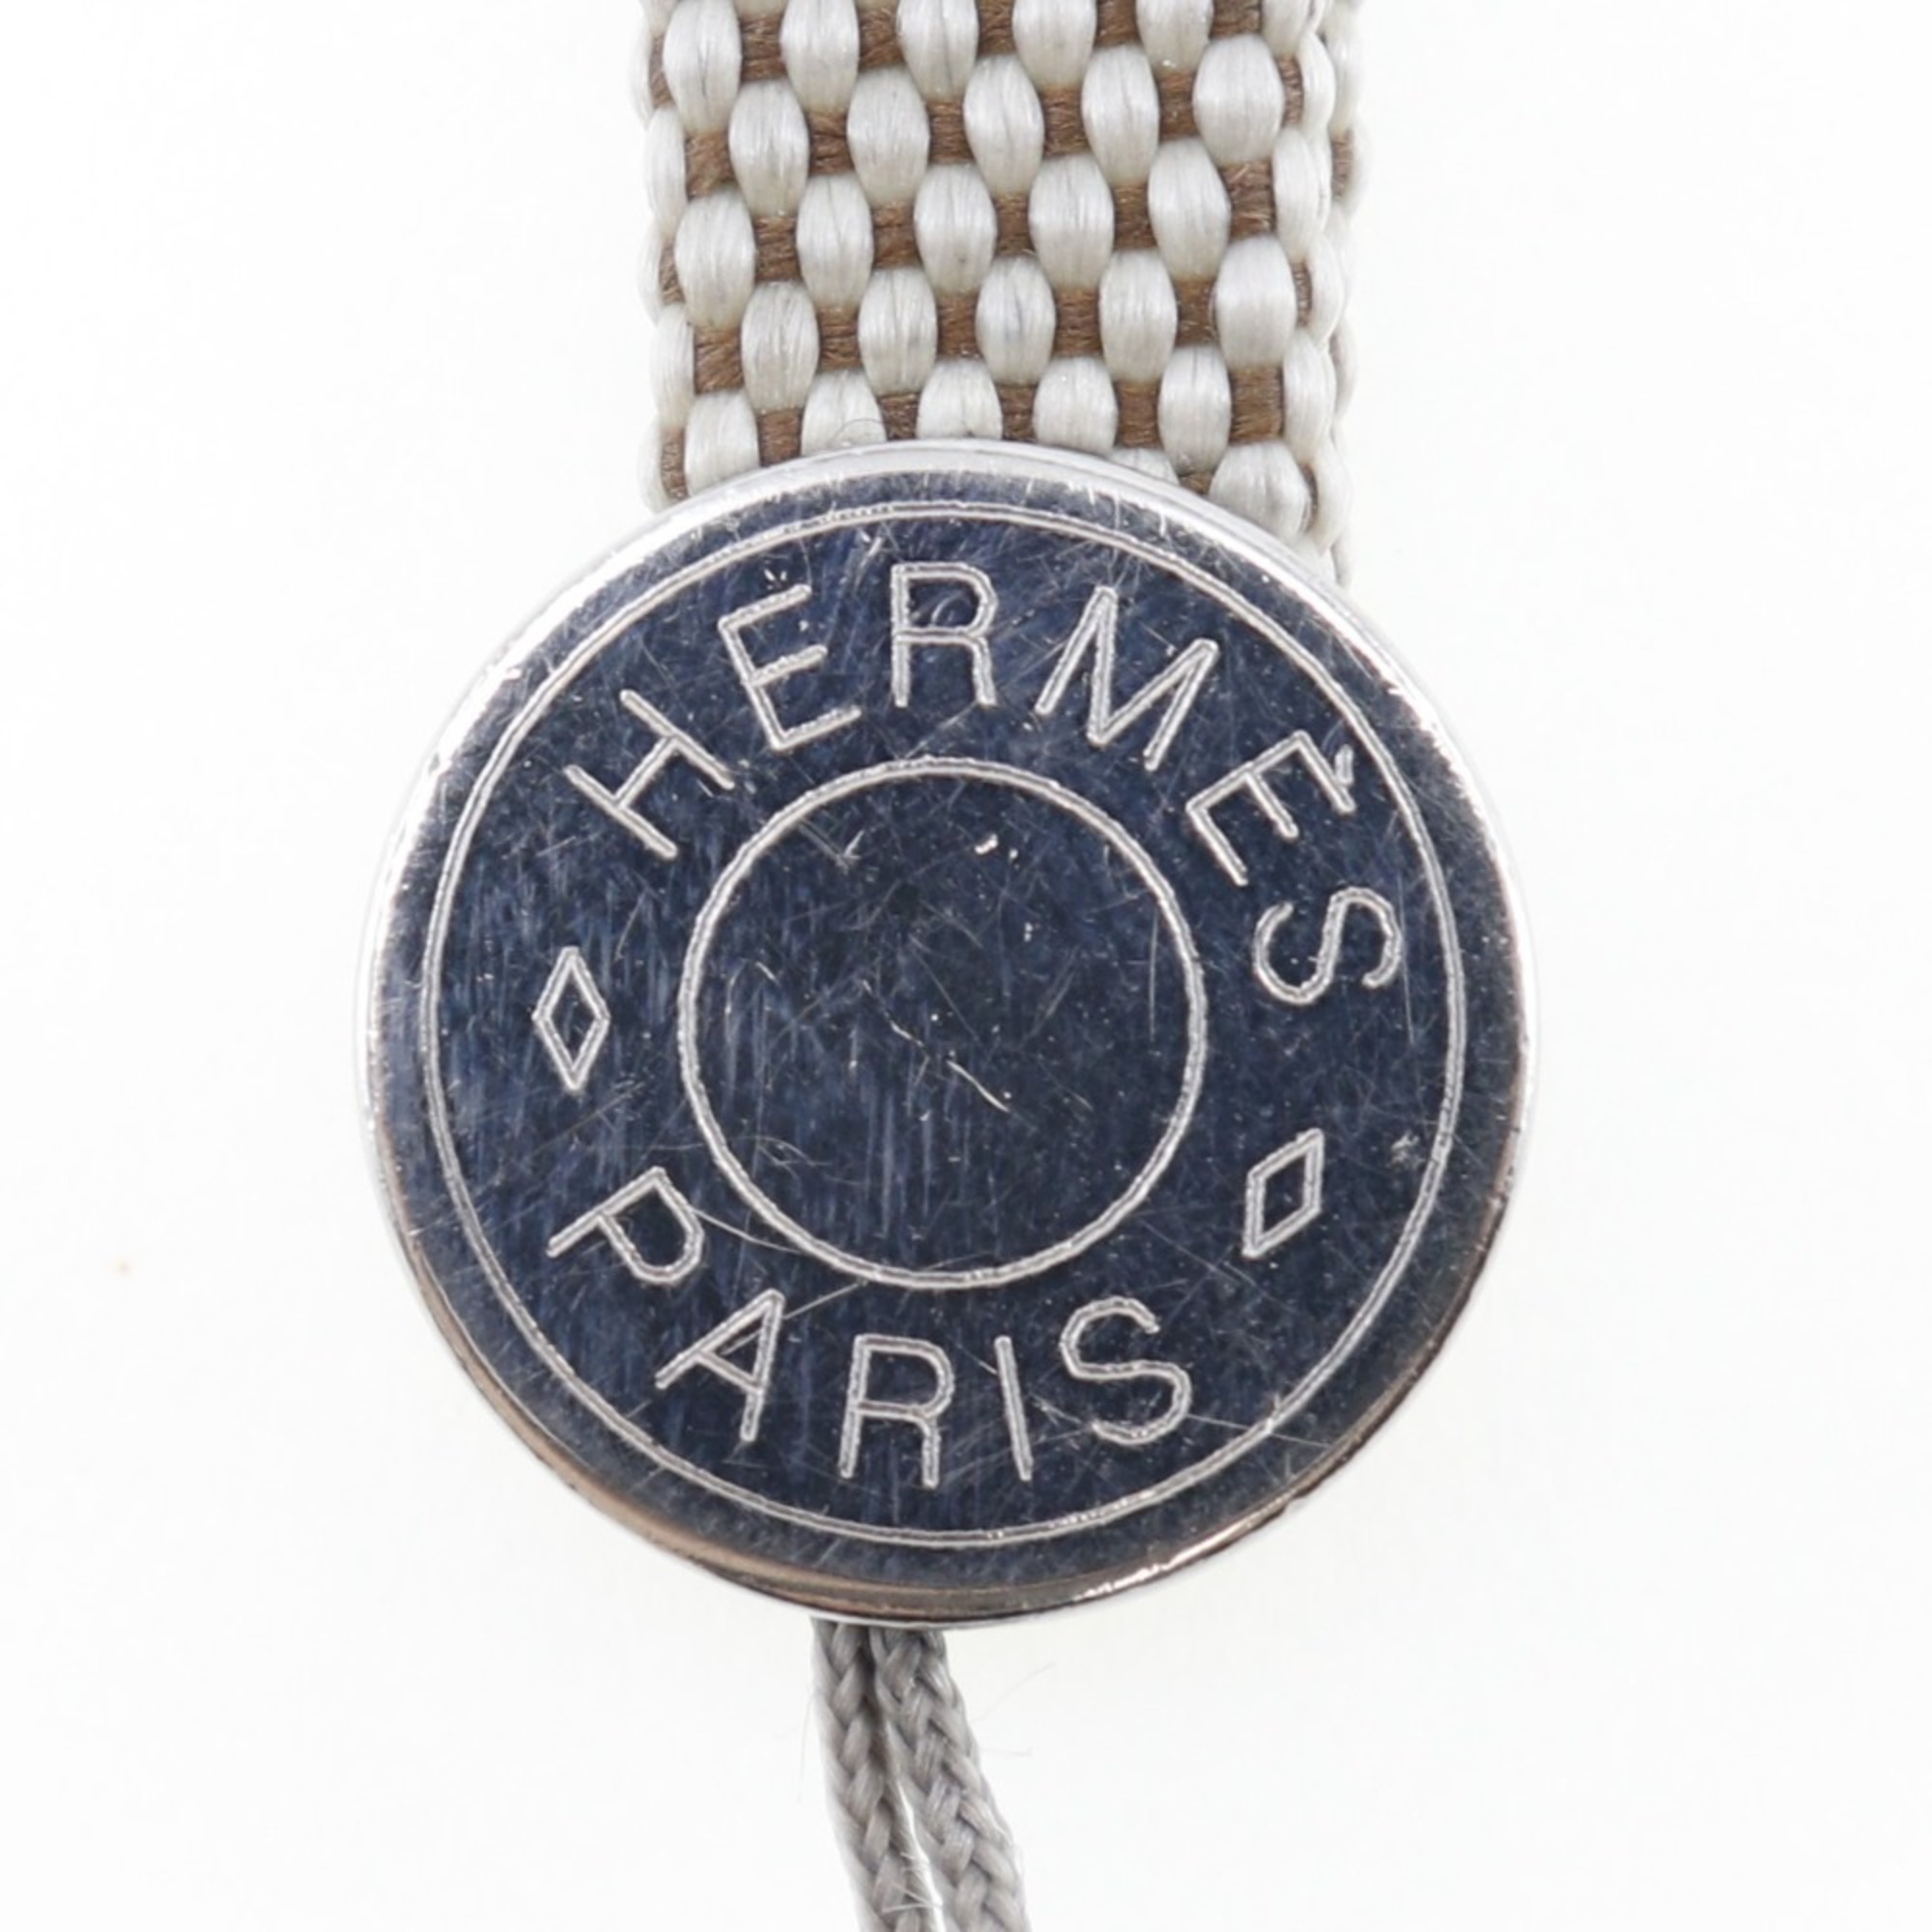 HERMES Cell Phone Strap Serie Canvas x Metal Made in France Beige phone strap Unisex